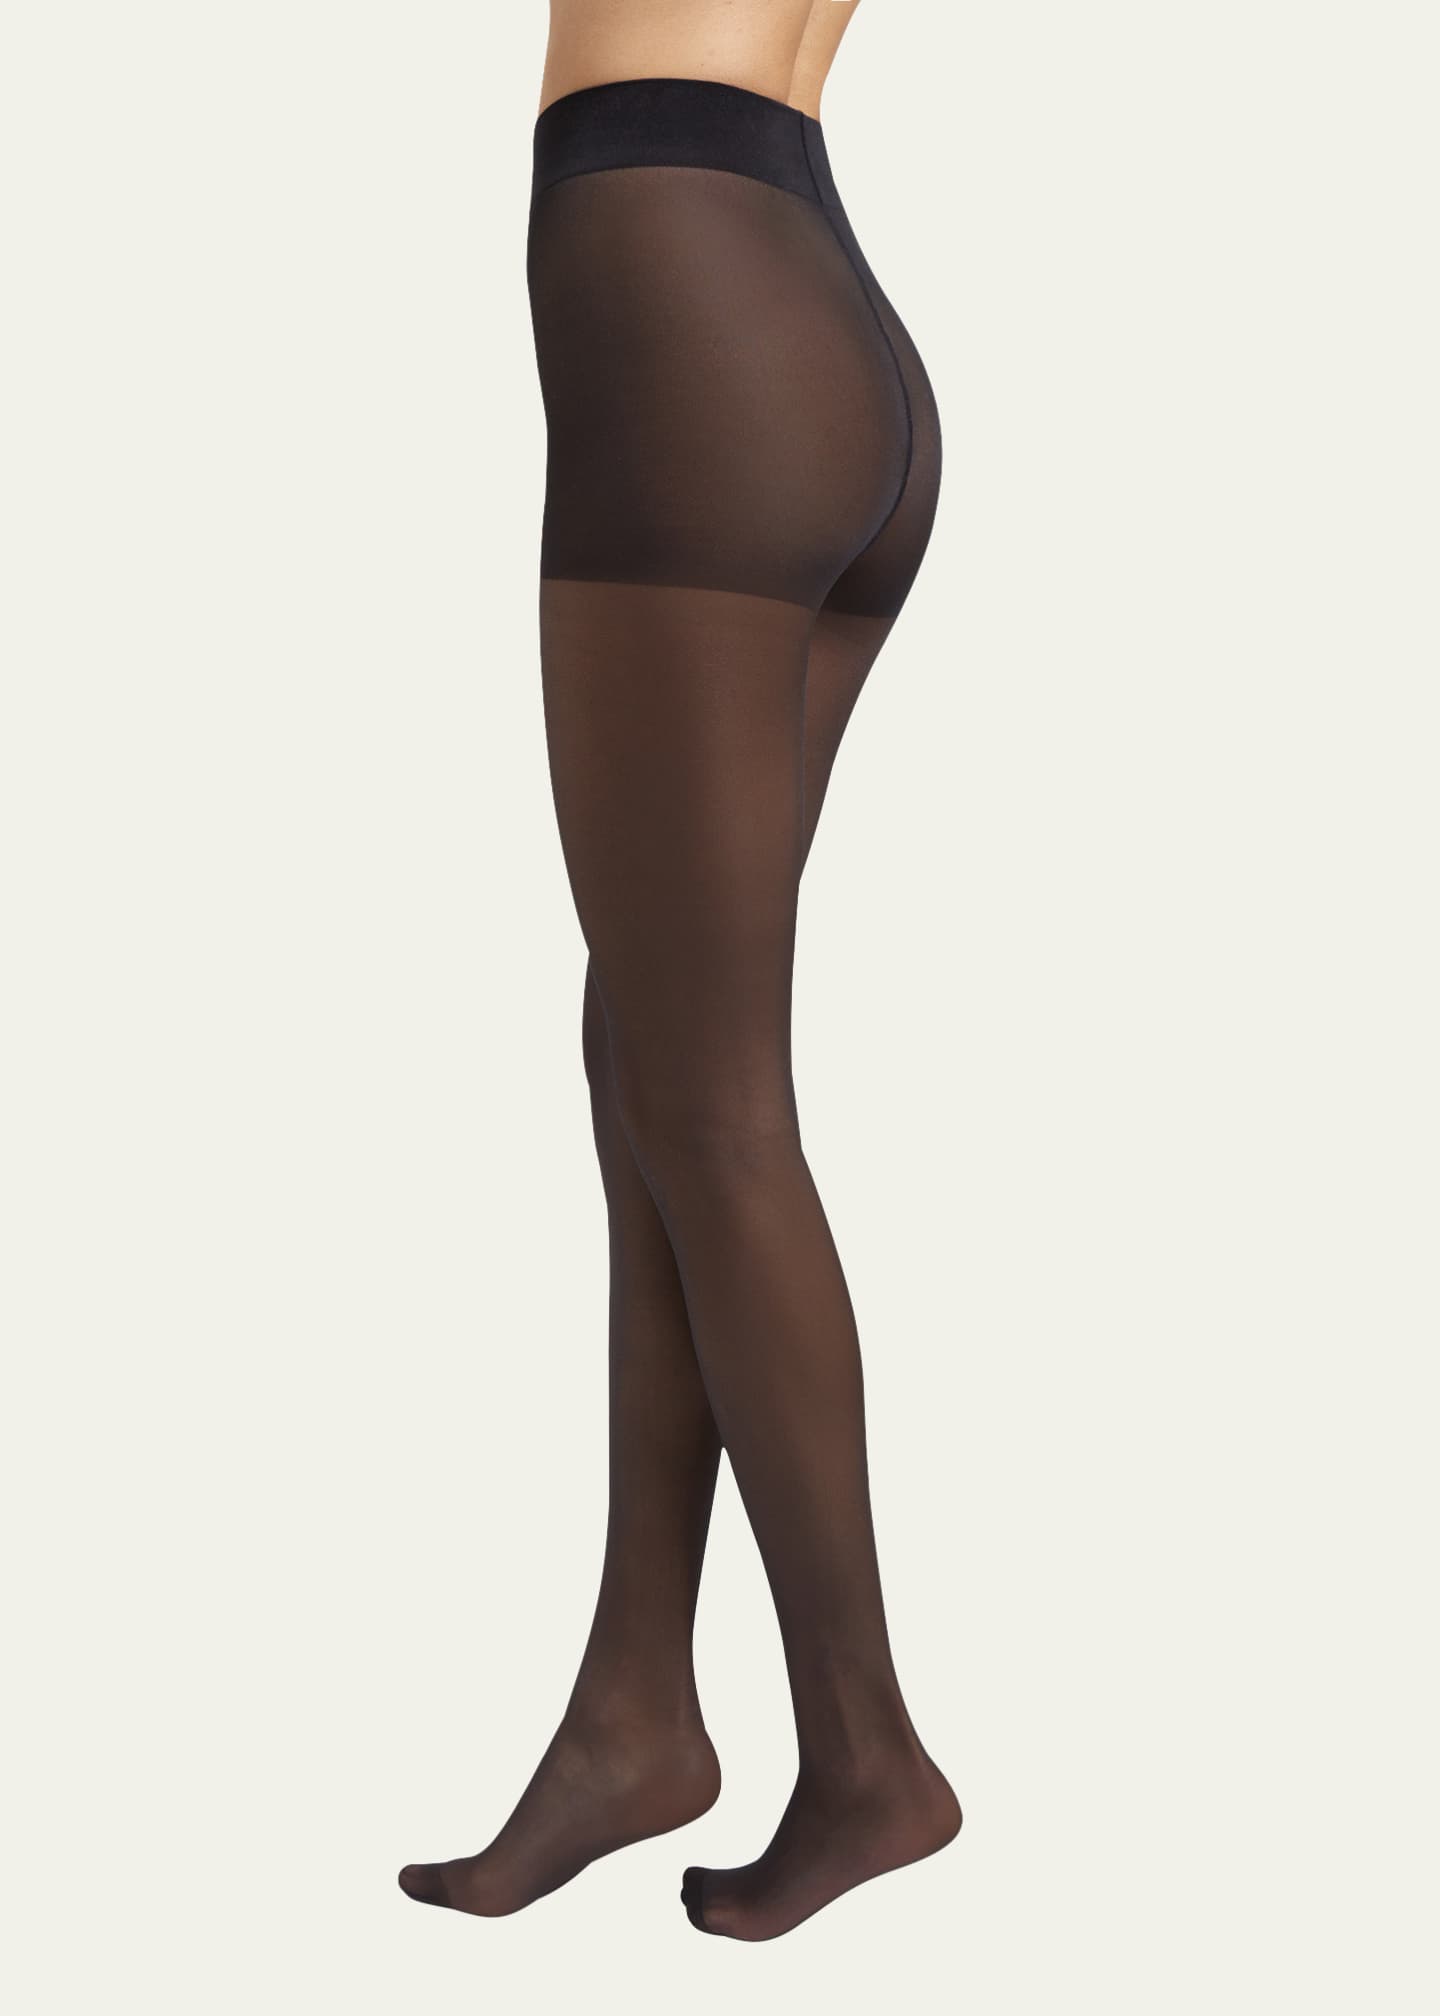 Hosiery For Men: Reviewed: Wolford Aurora Pullover